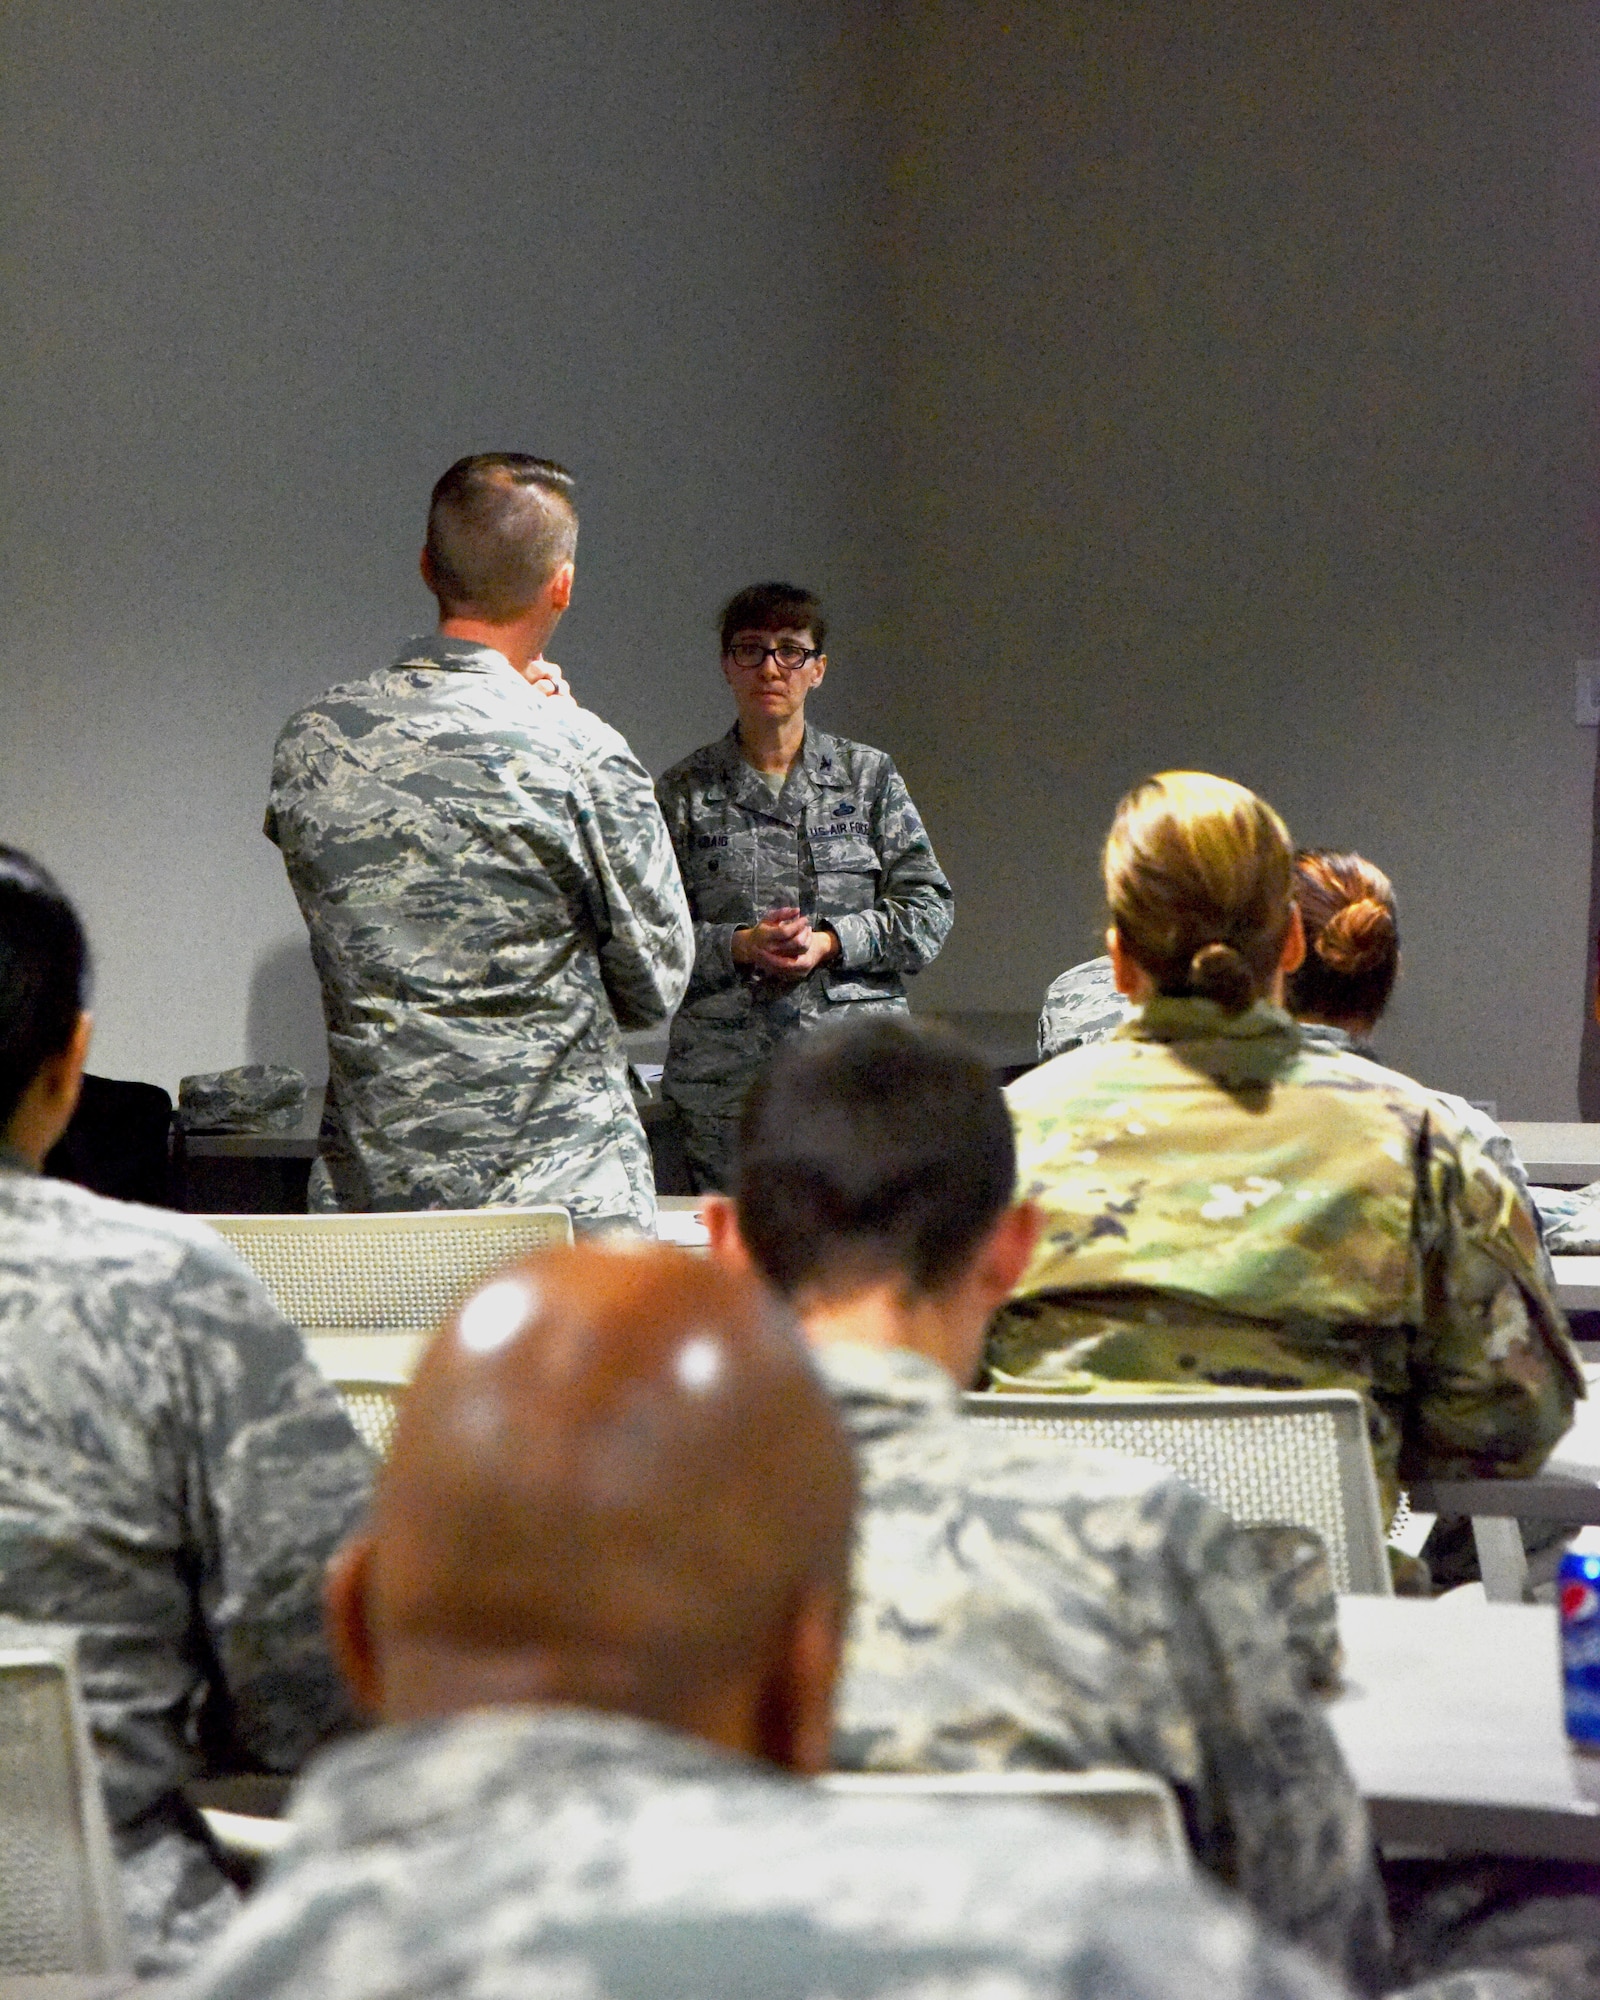 The Air Force Reserve director of manpower, personnel and services spoke on recruiting and retaining quality Airmen during a Force Support Squadron all call Dec. 1, 2018.